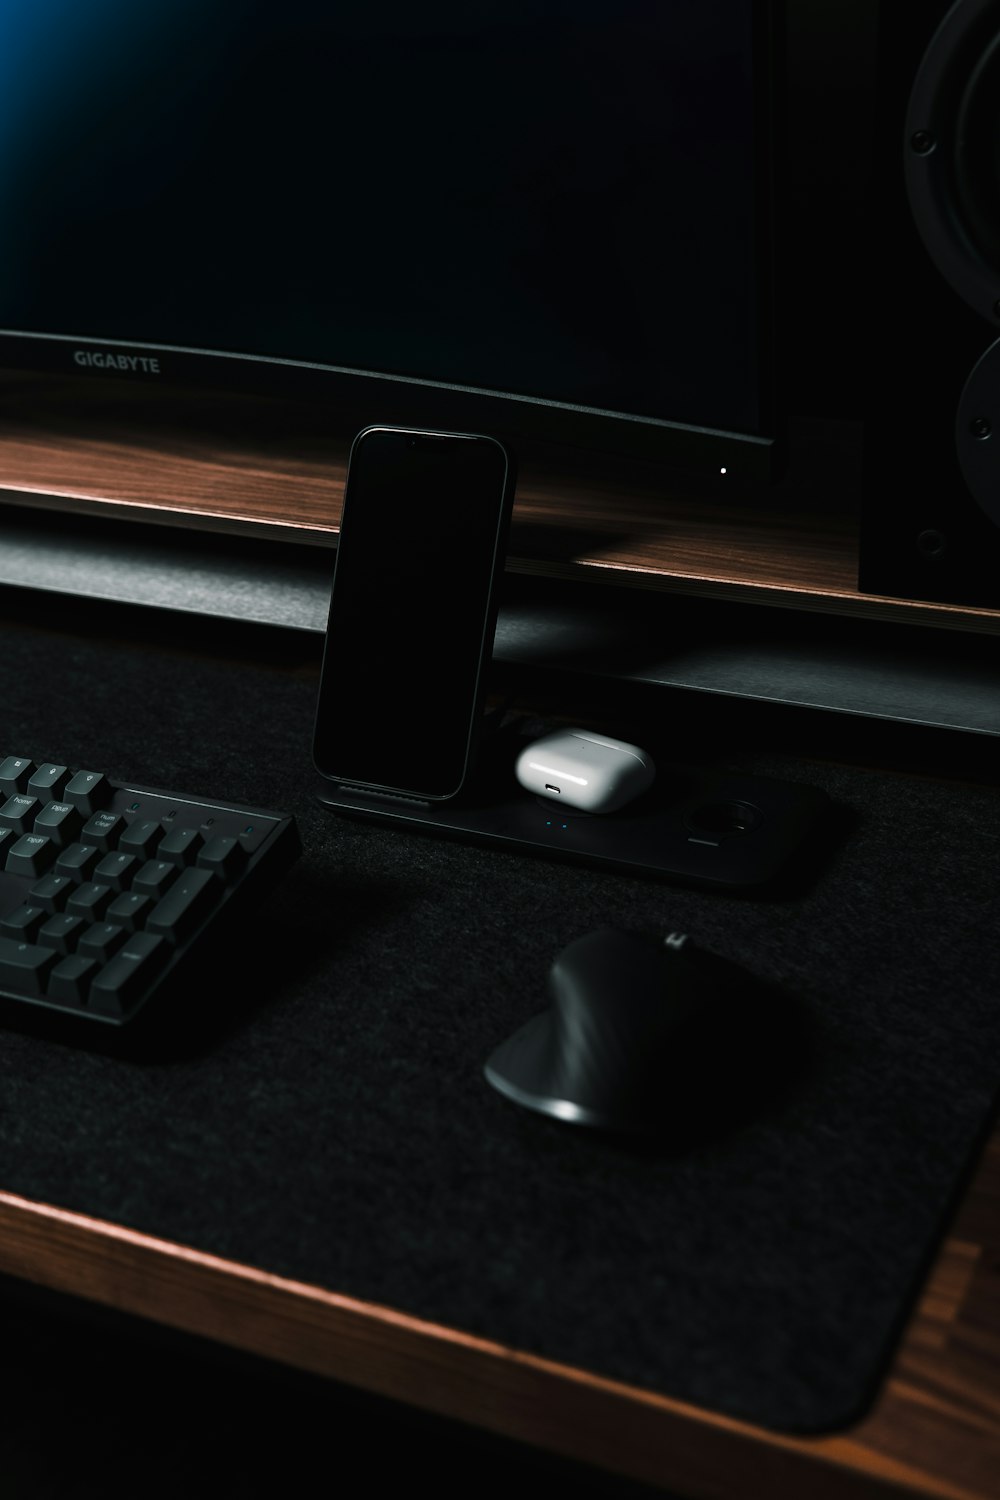 a computer keyboard, mouse, and cell phone on a desk